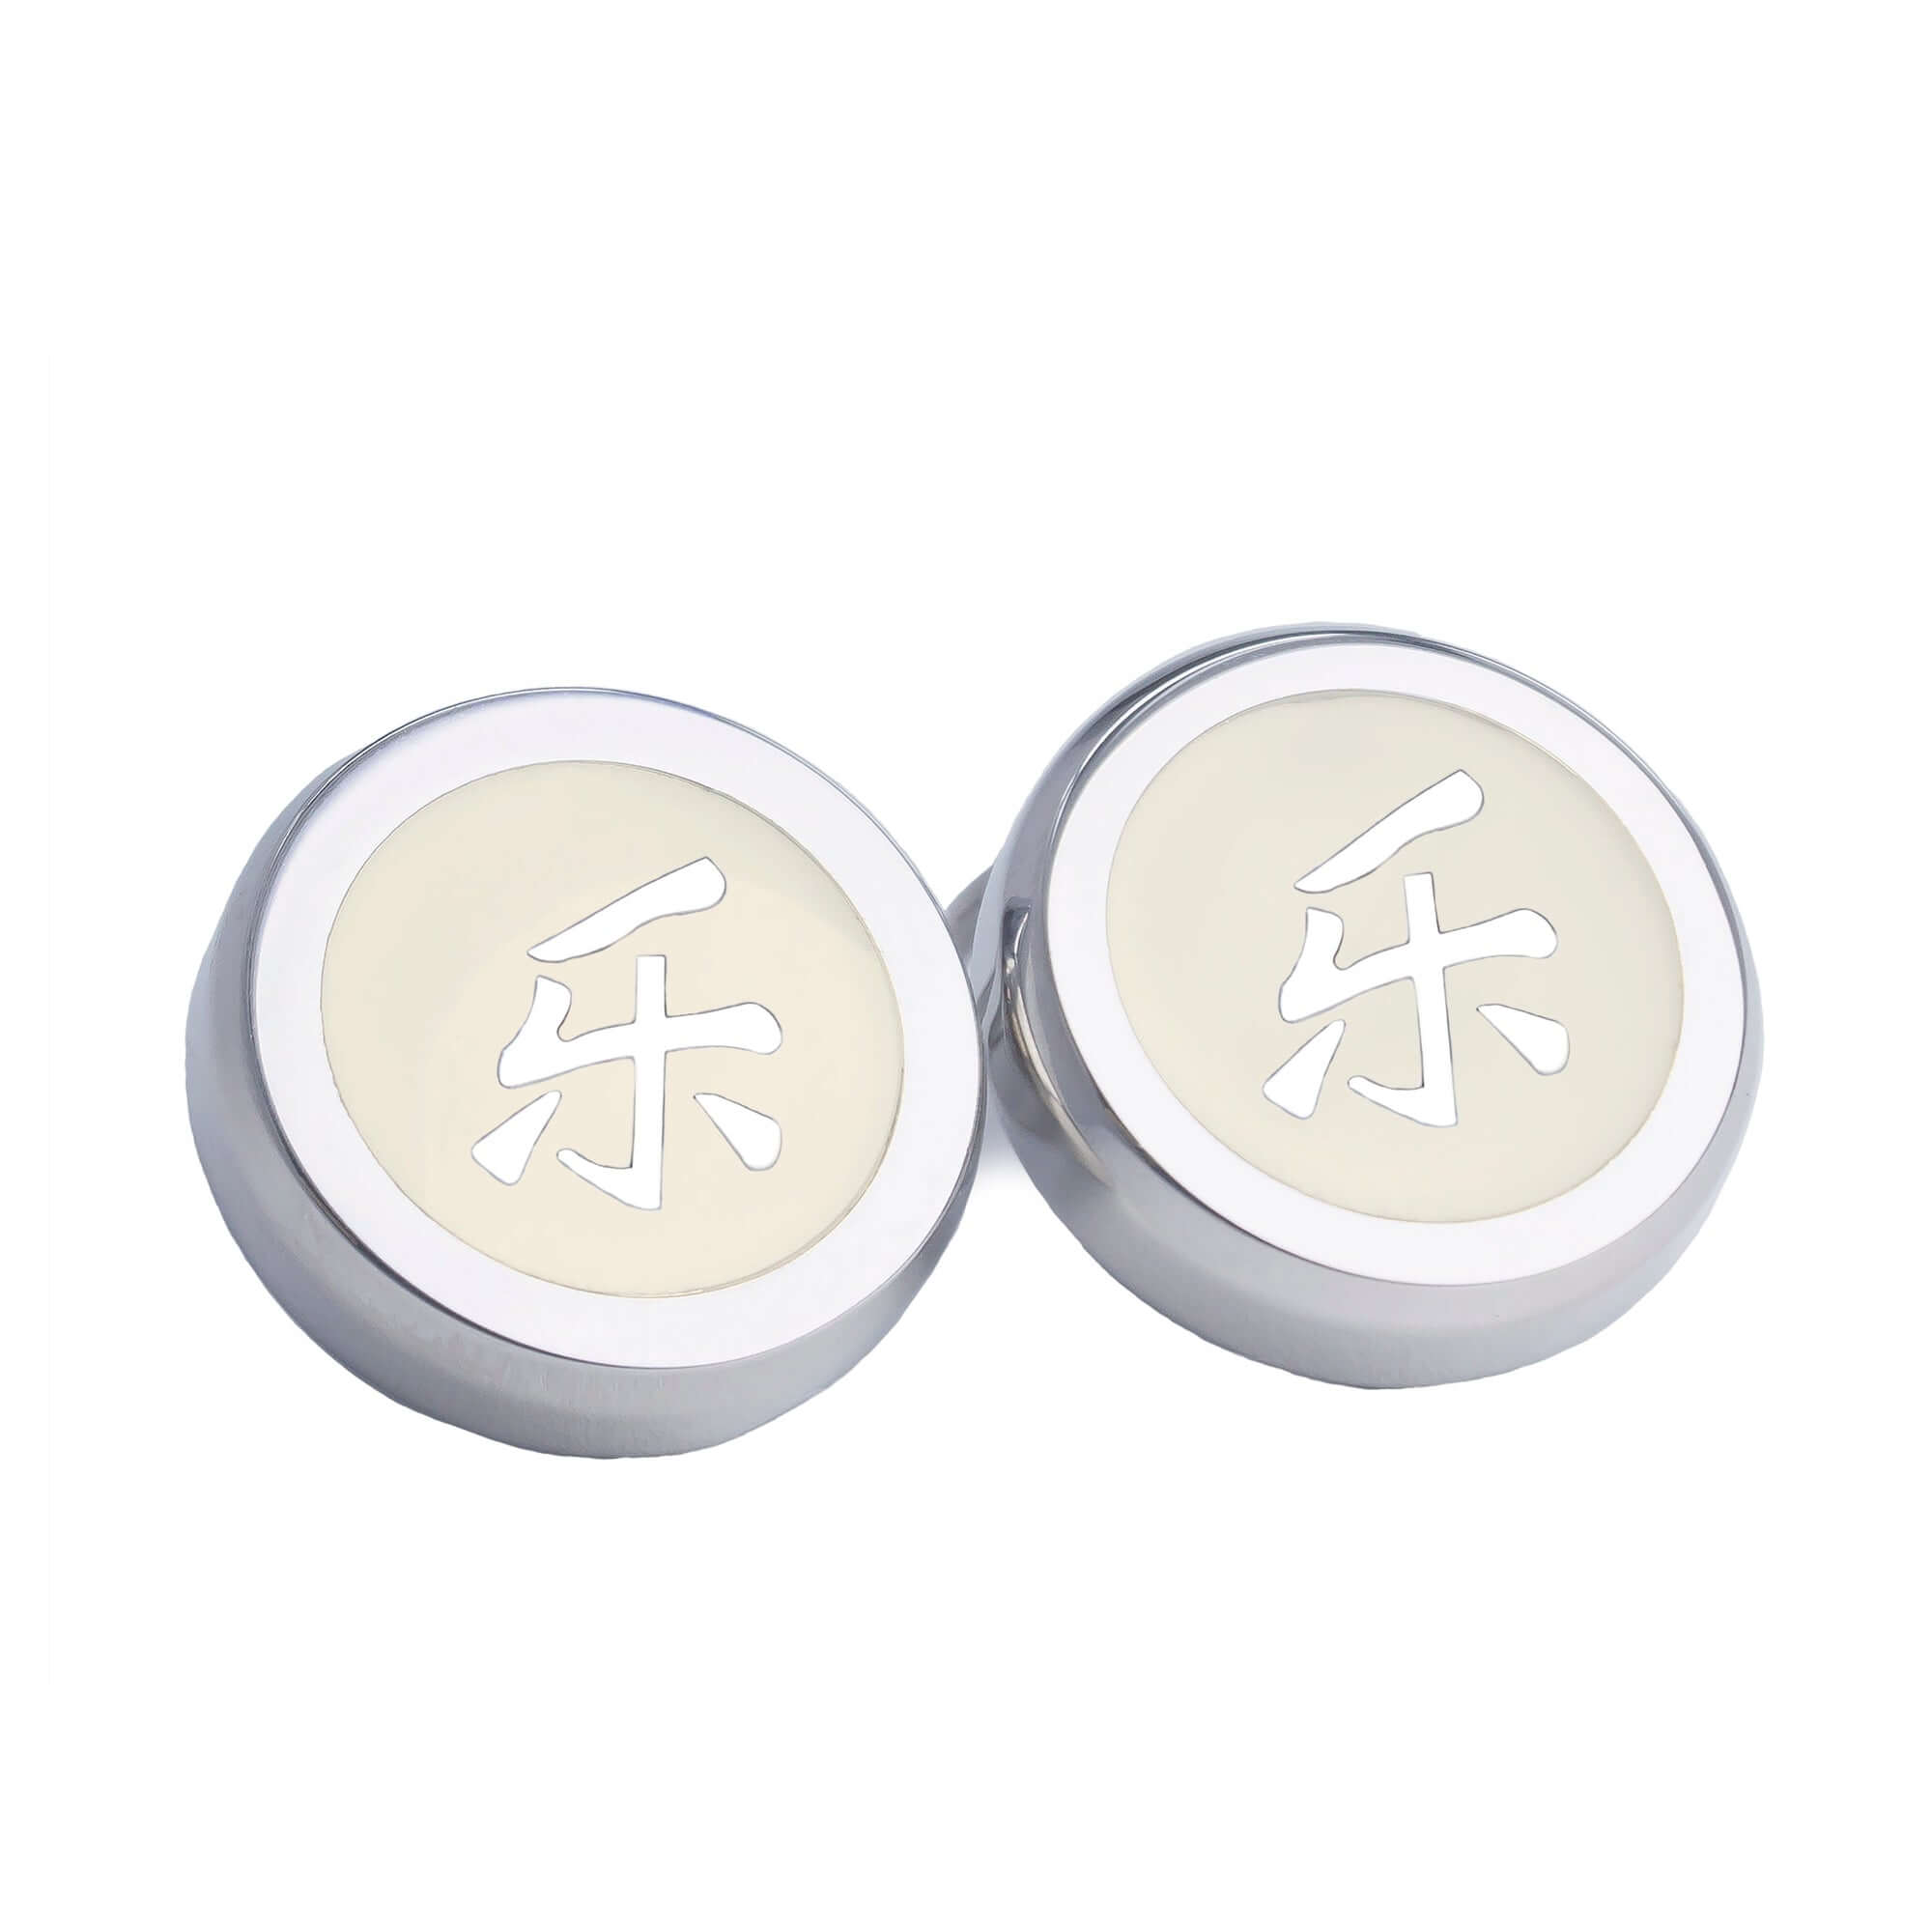 Chinese Character Silver Button Covers-Button Covers-A.Azthom-乐 Le-Cufflinks.com.sg